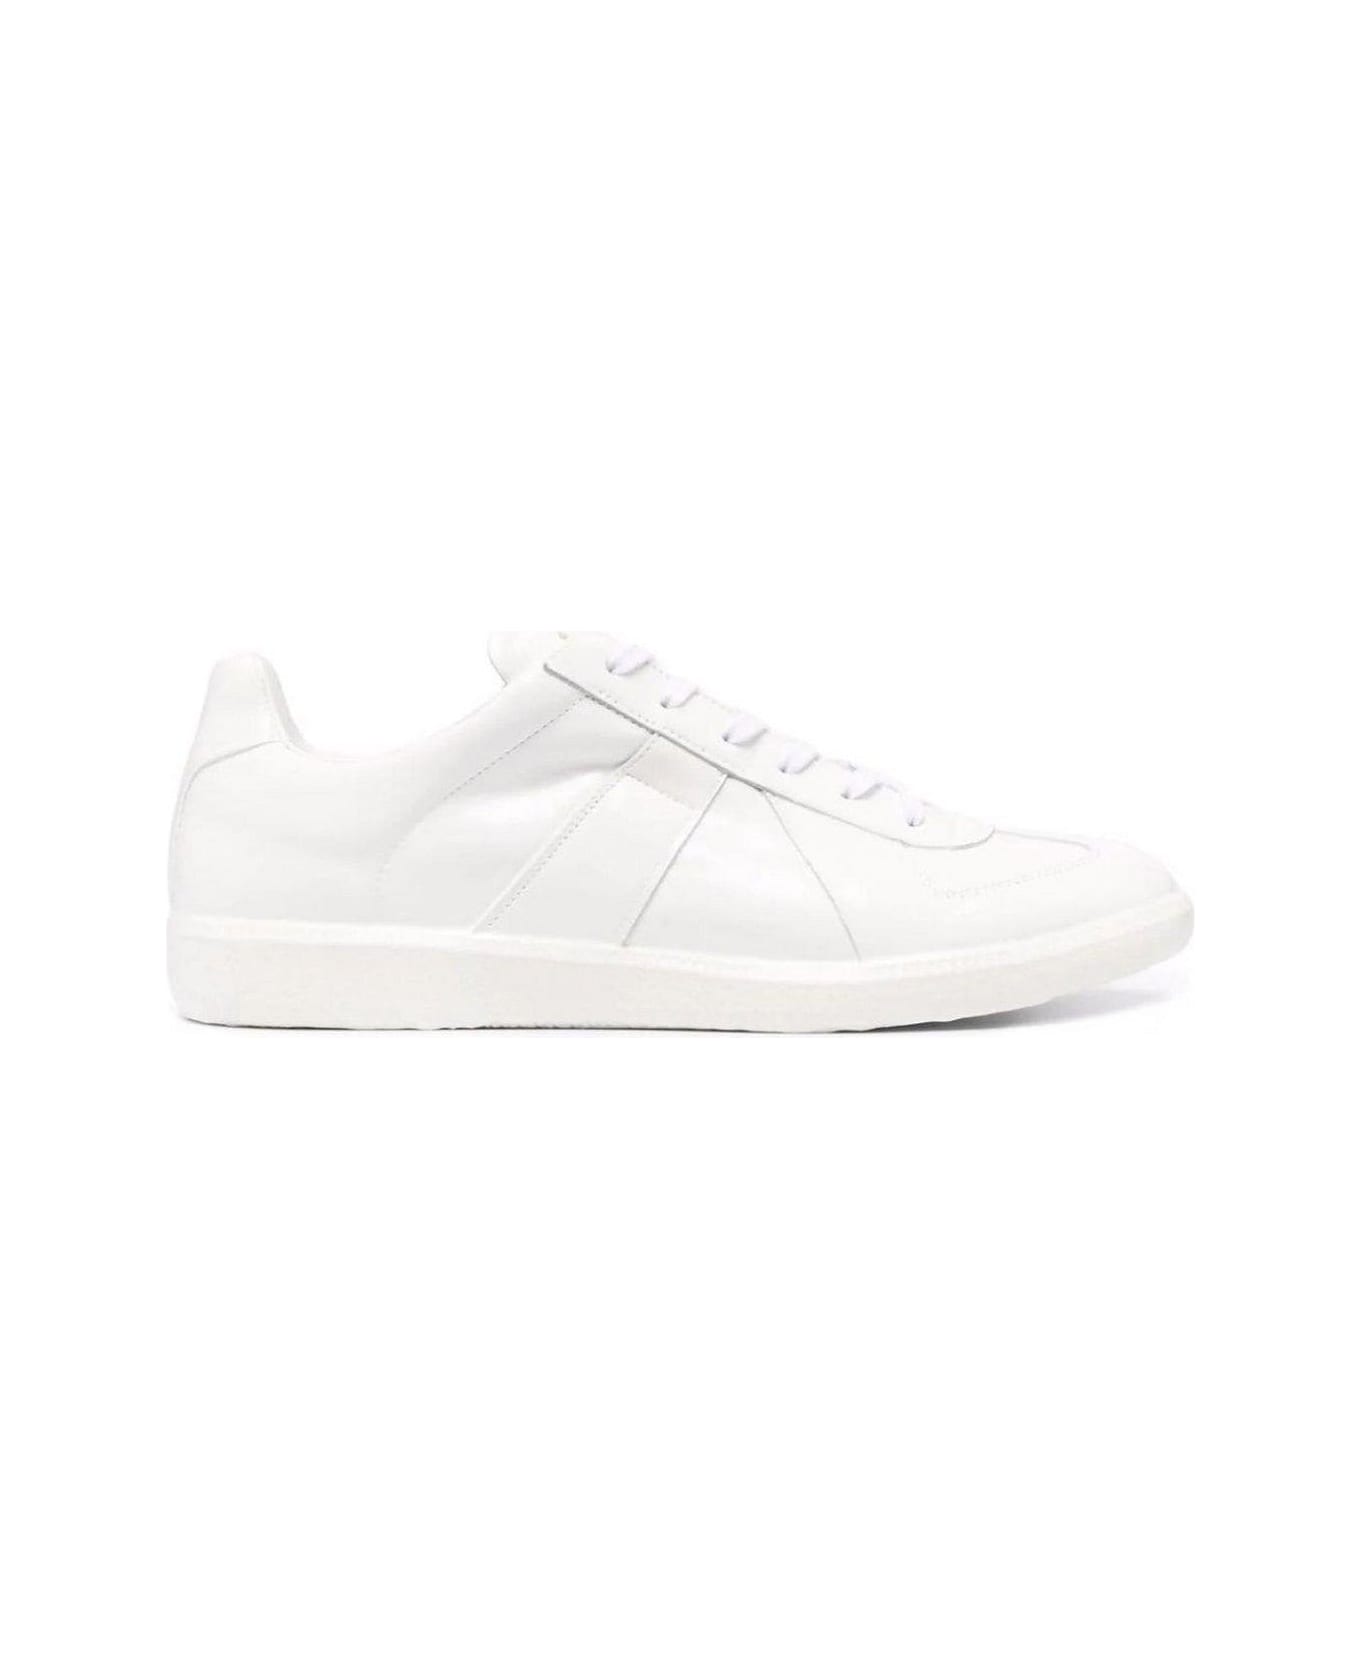 Maison Margiela Replica Lace-up Sneakers スニーカー